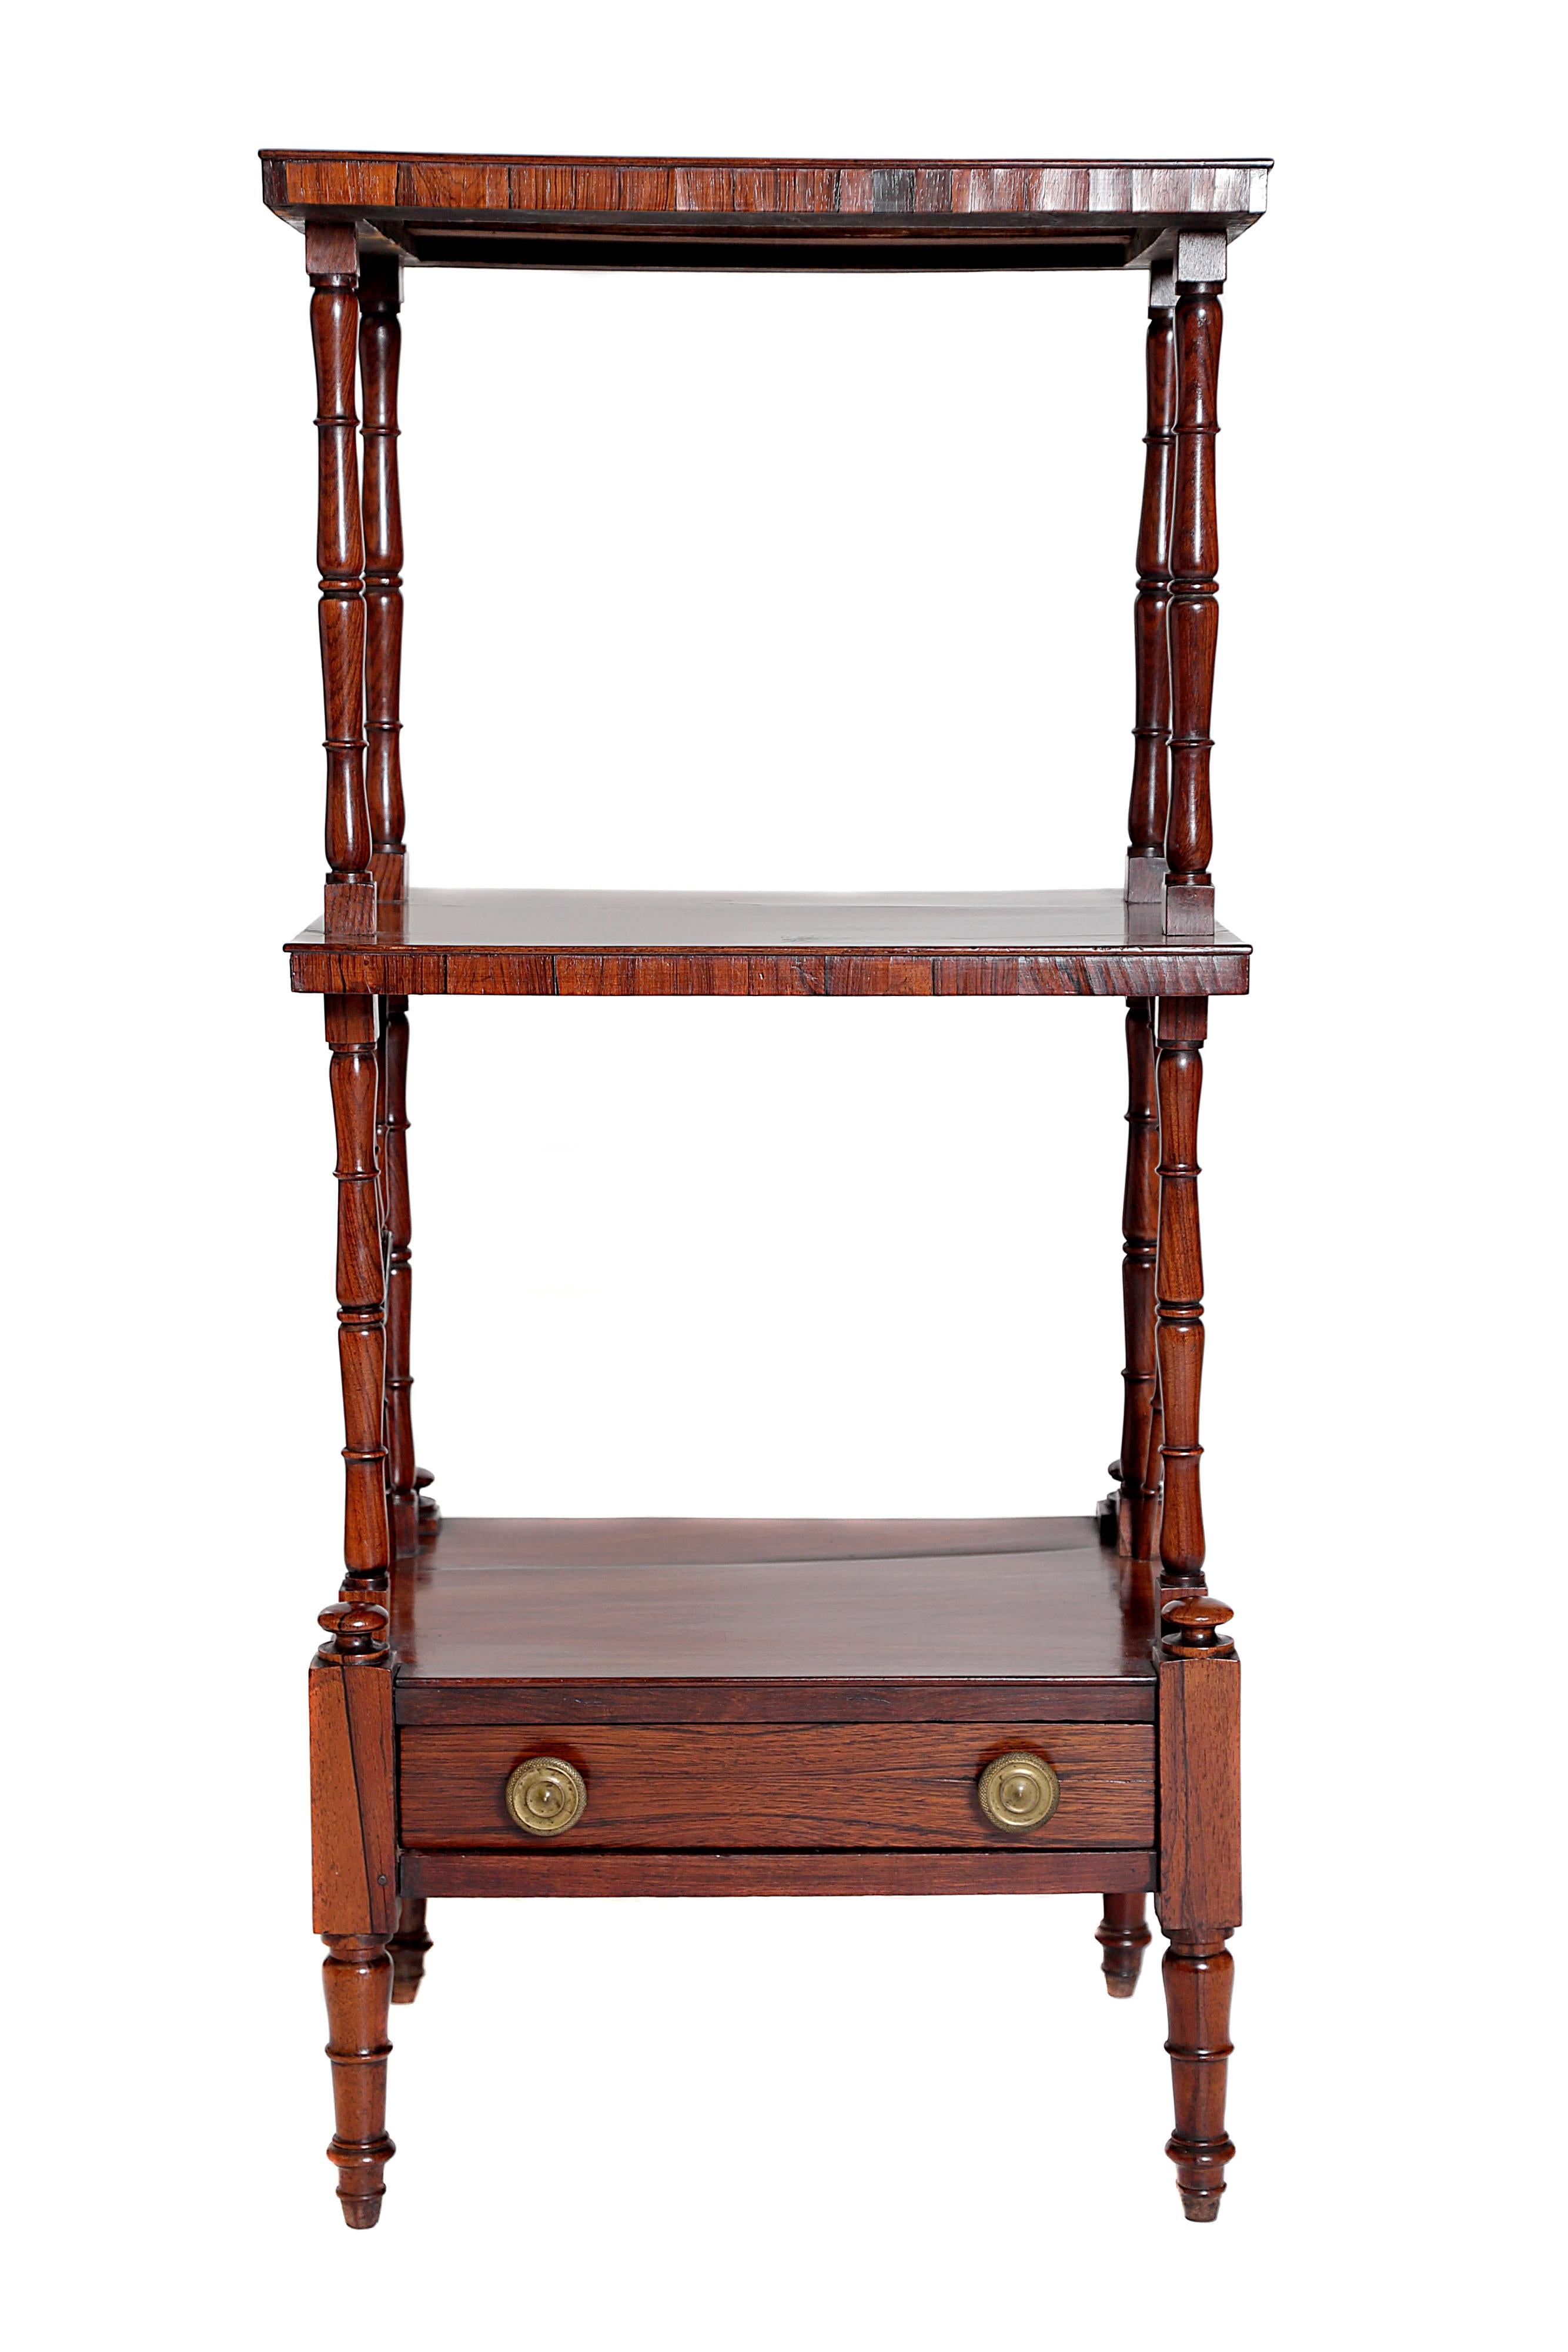 An English Regency rosewood 3-tier whatnot / bookshelf. Handmade of rosewood, with great color and patina. Three tiers, supported by turned columns with lovely turned spindles in between. A single drawer to the base, cup castors missing.